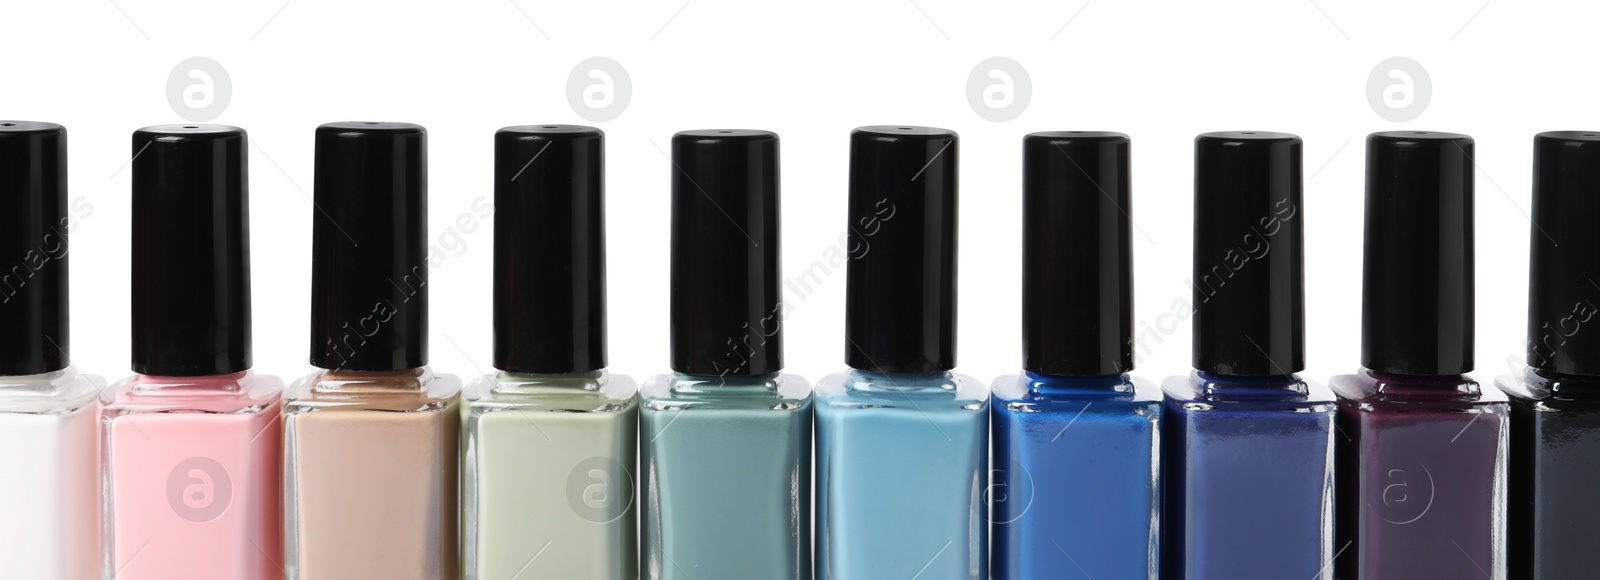 Photo of Beautiful nail polishes in bottles isolated on white